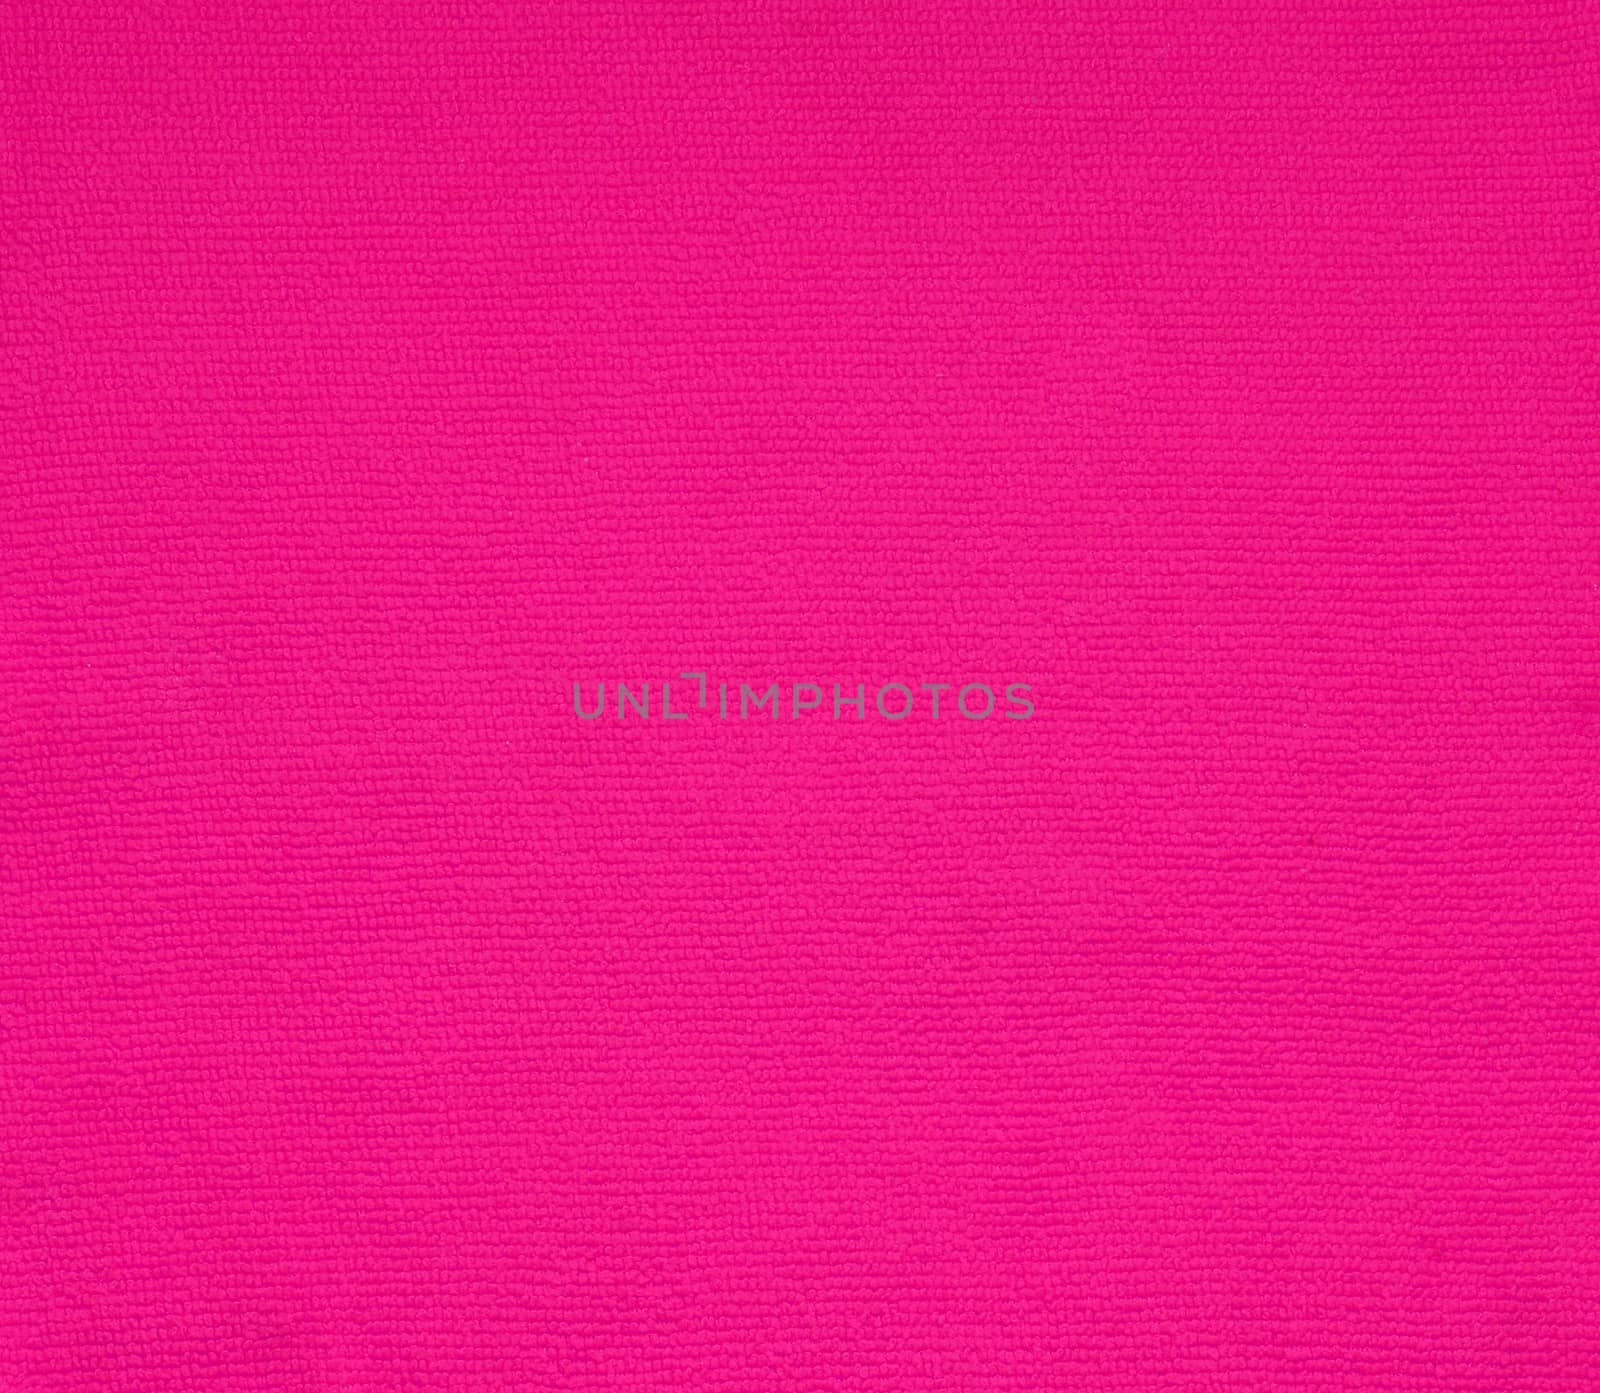 surface pink fabric texture for background